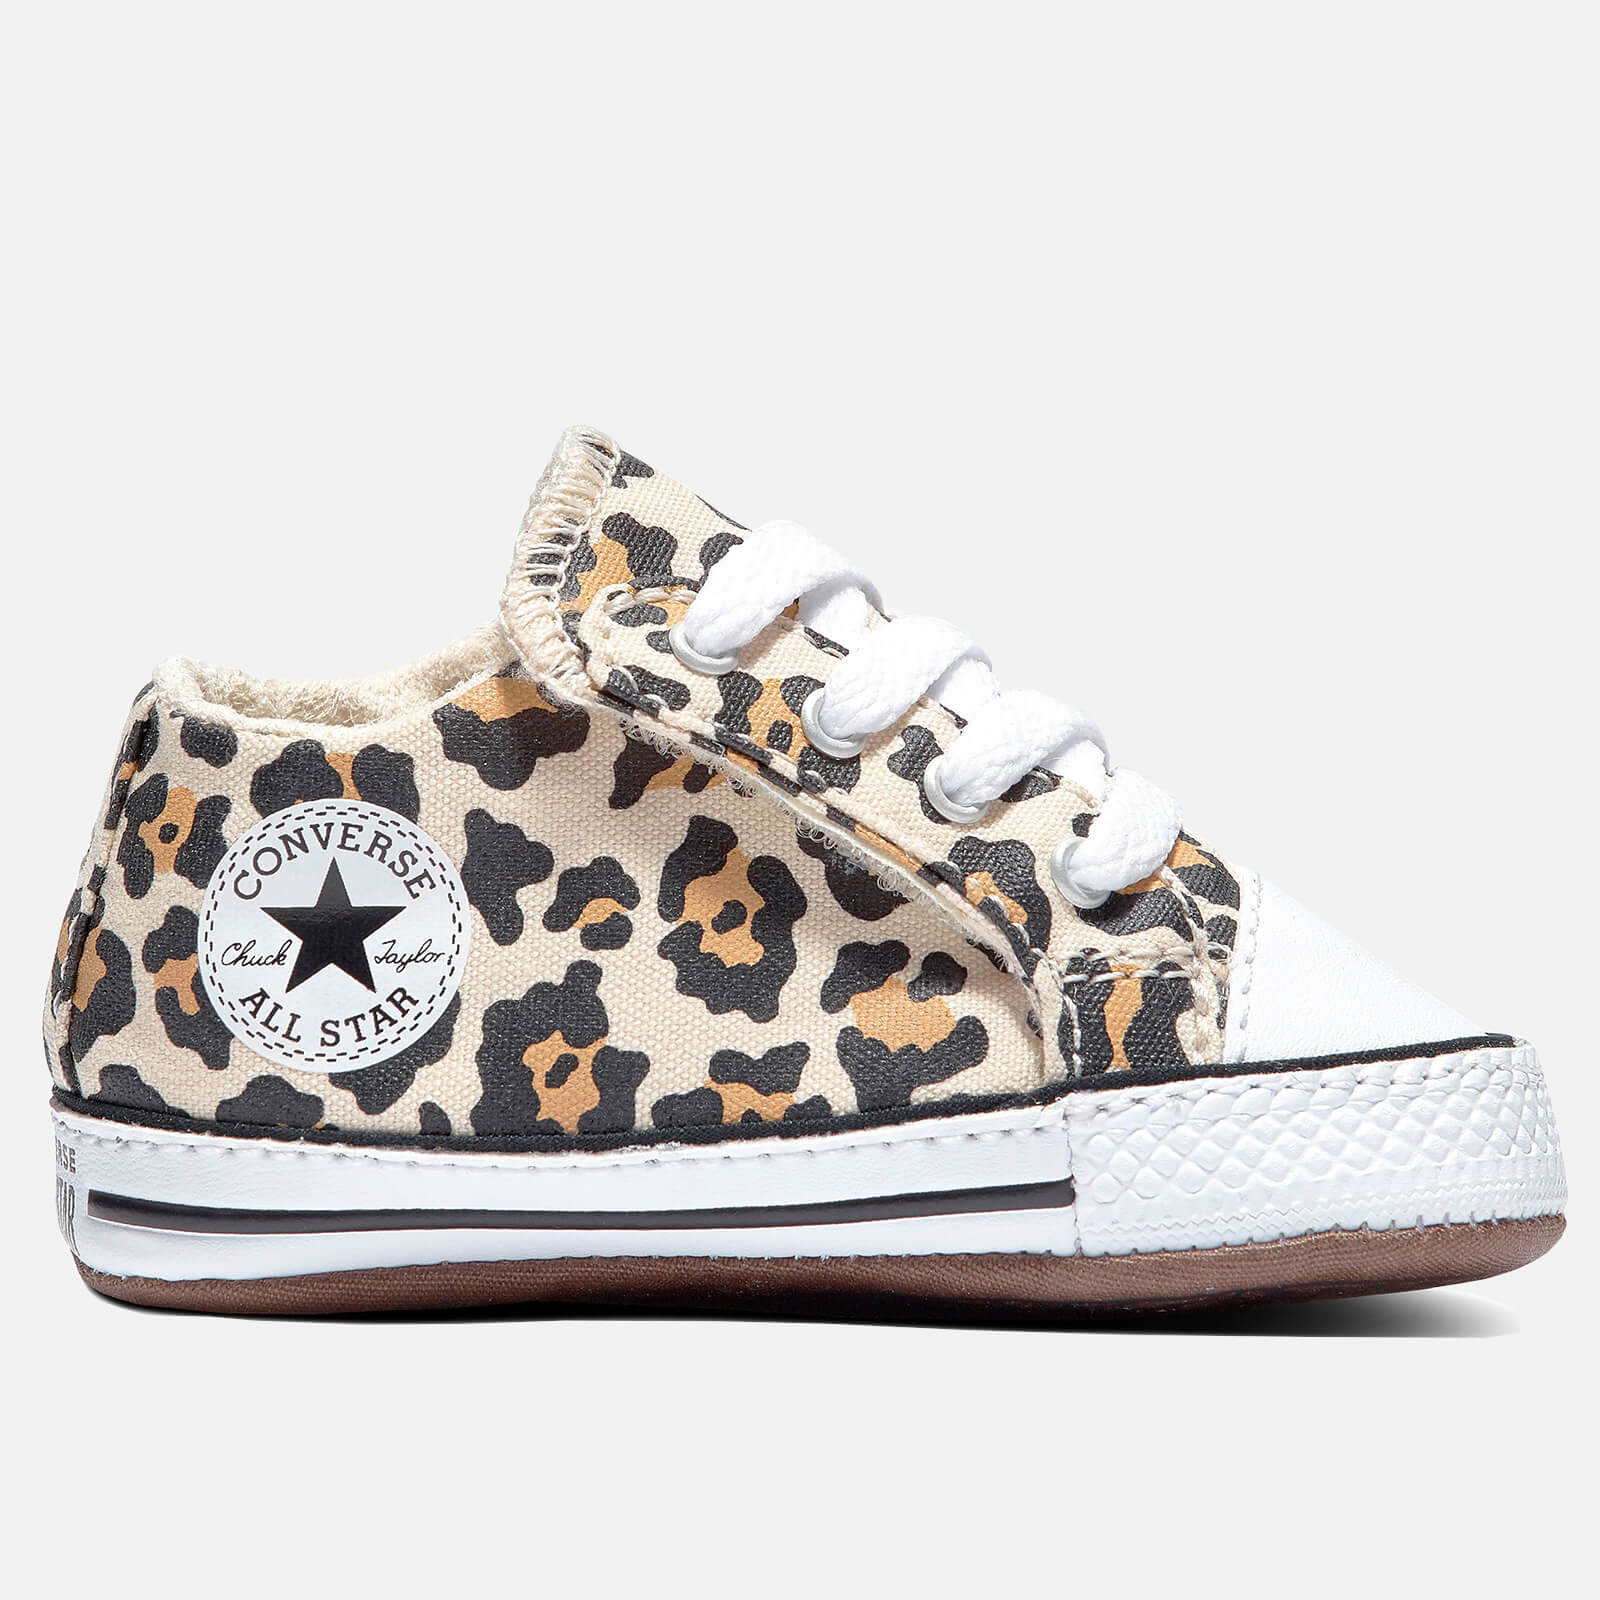 Converse Babies' Chuck Taylor All Star Cribster Animal Print Soft Trainers - Black/Driftwood - UK 4 Baby